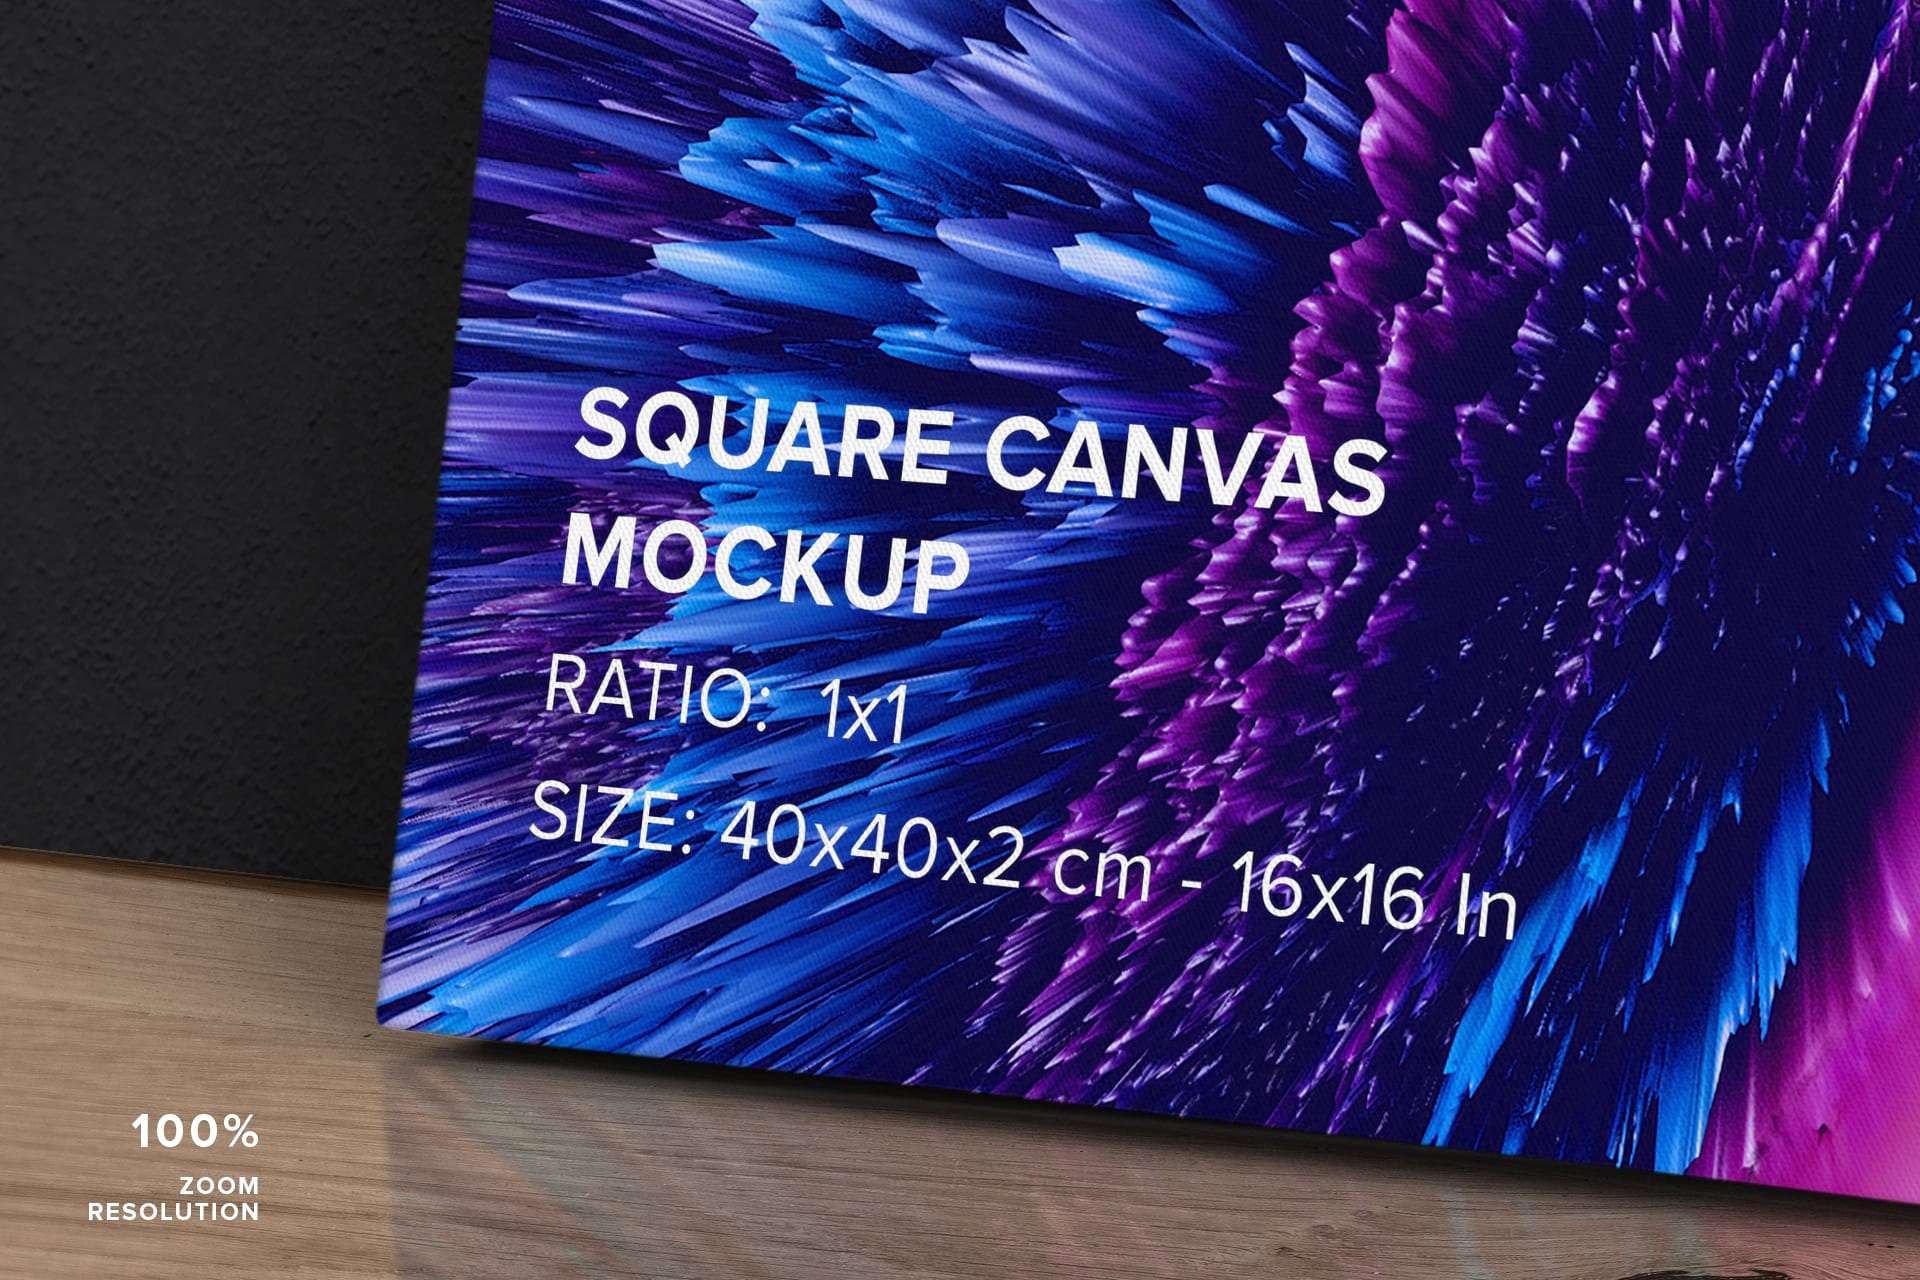 Leaning Square Canvas Ratio 1x1 Mockup - Right 1.5 in Left